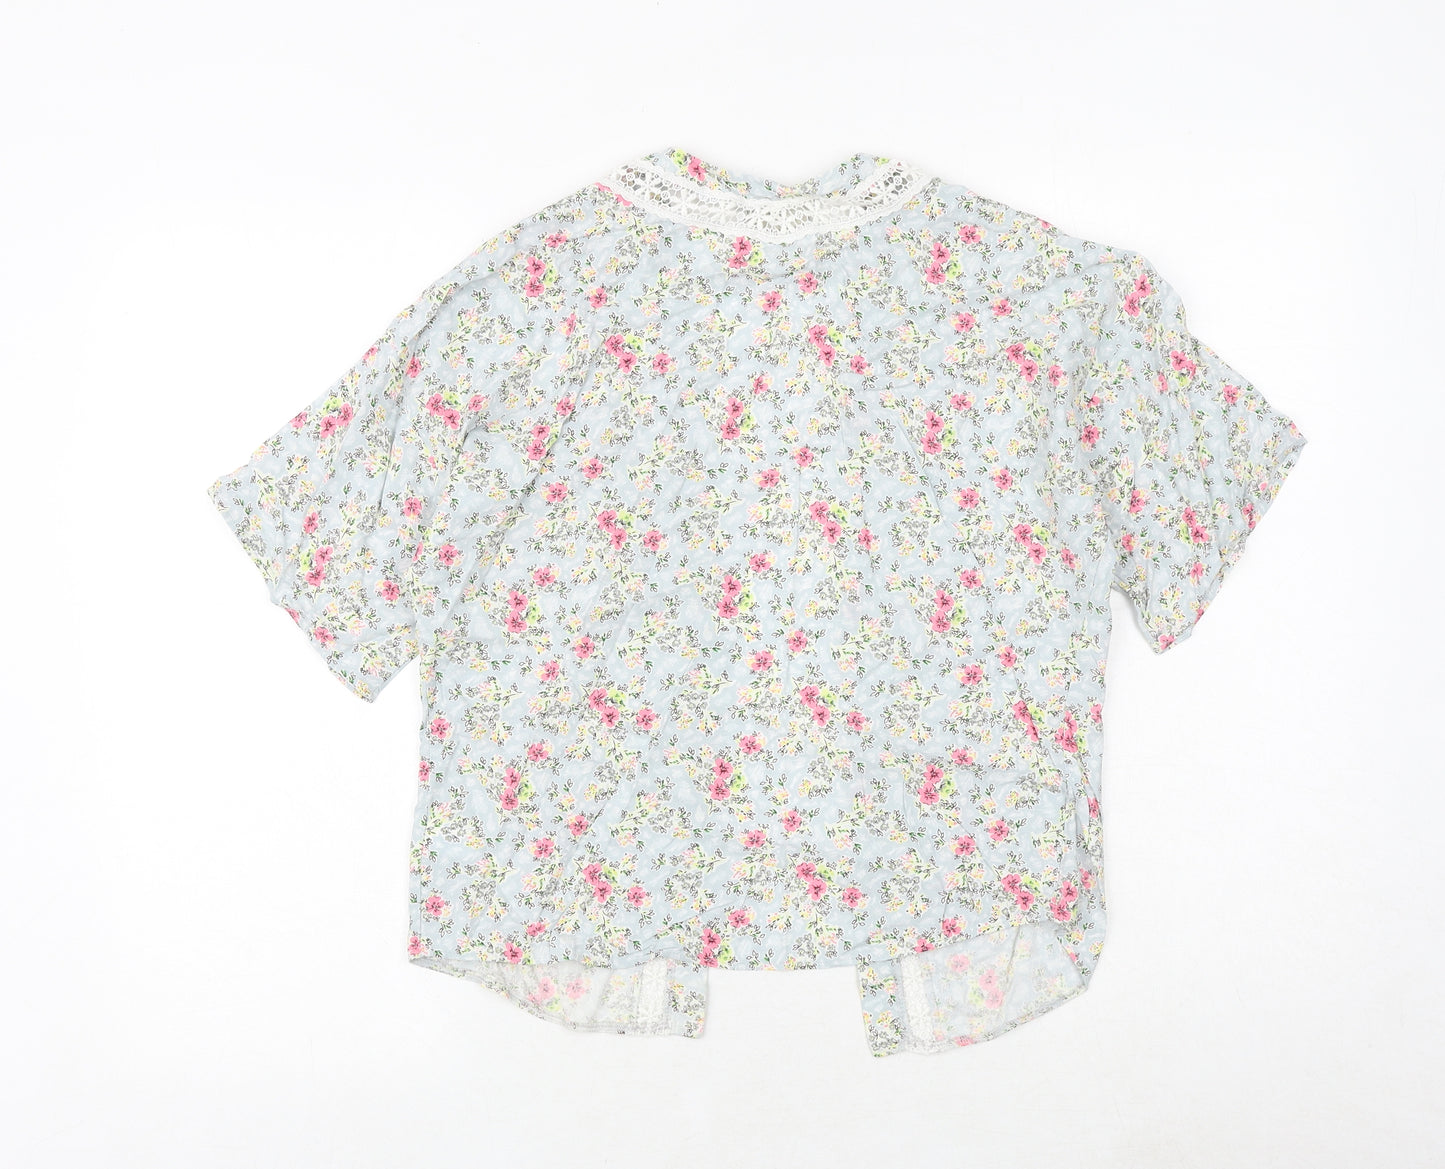 NEXT Girls Multicoloured Floral Viscose Kimono Blouse Size 11 Years V-Neck Pullover - Lace Details